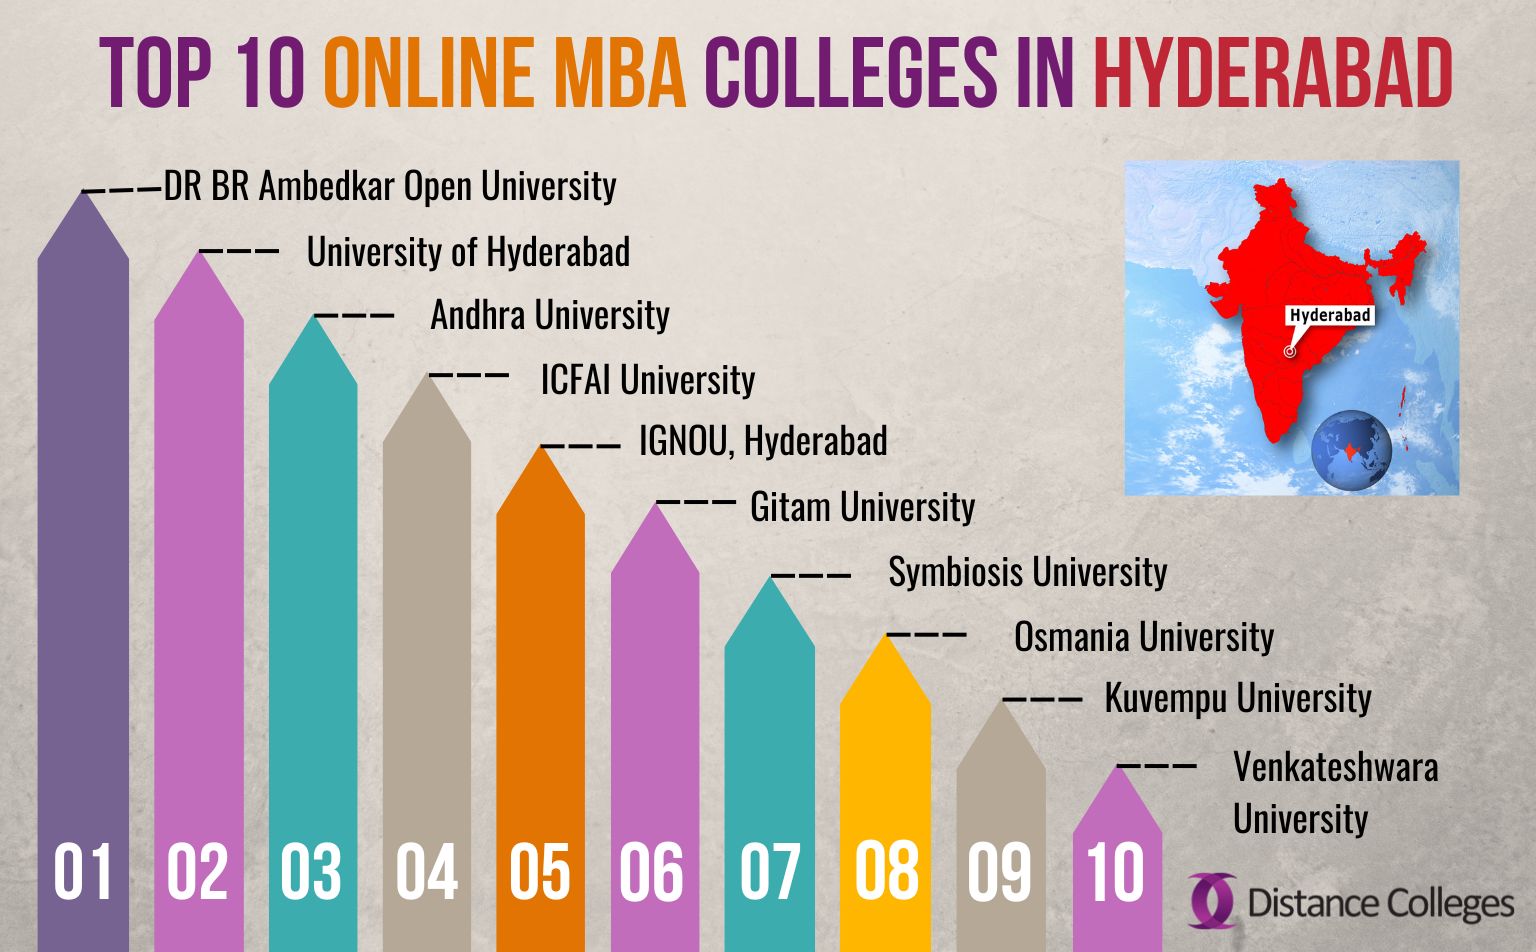 Top 10 Online MBA Colleges In Hyderabad